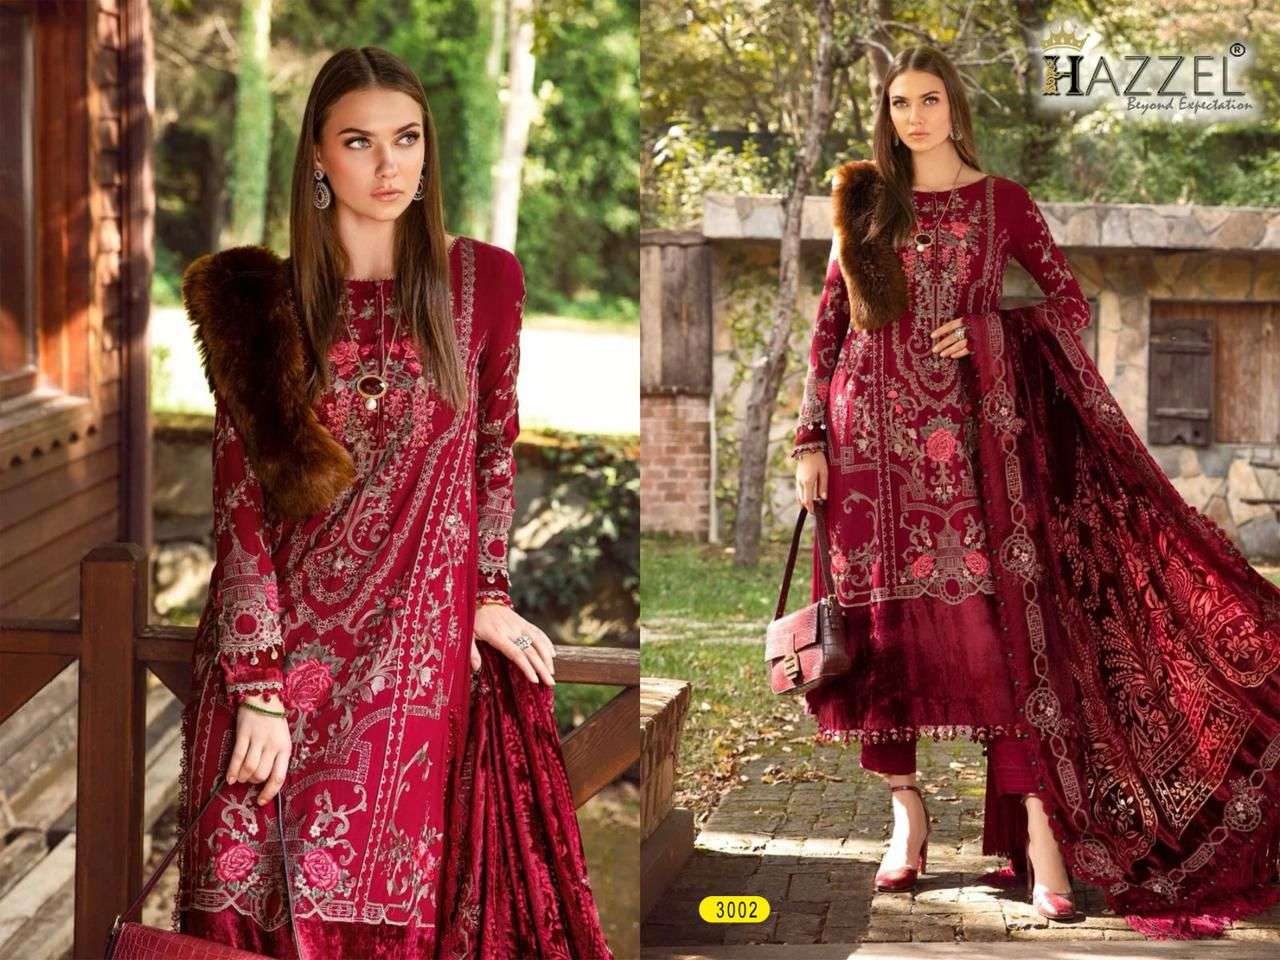 HAZZEL MARIA B EMBROIDERED 24 